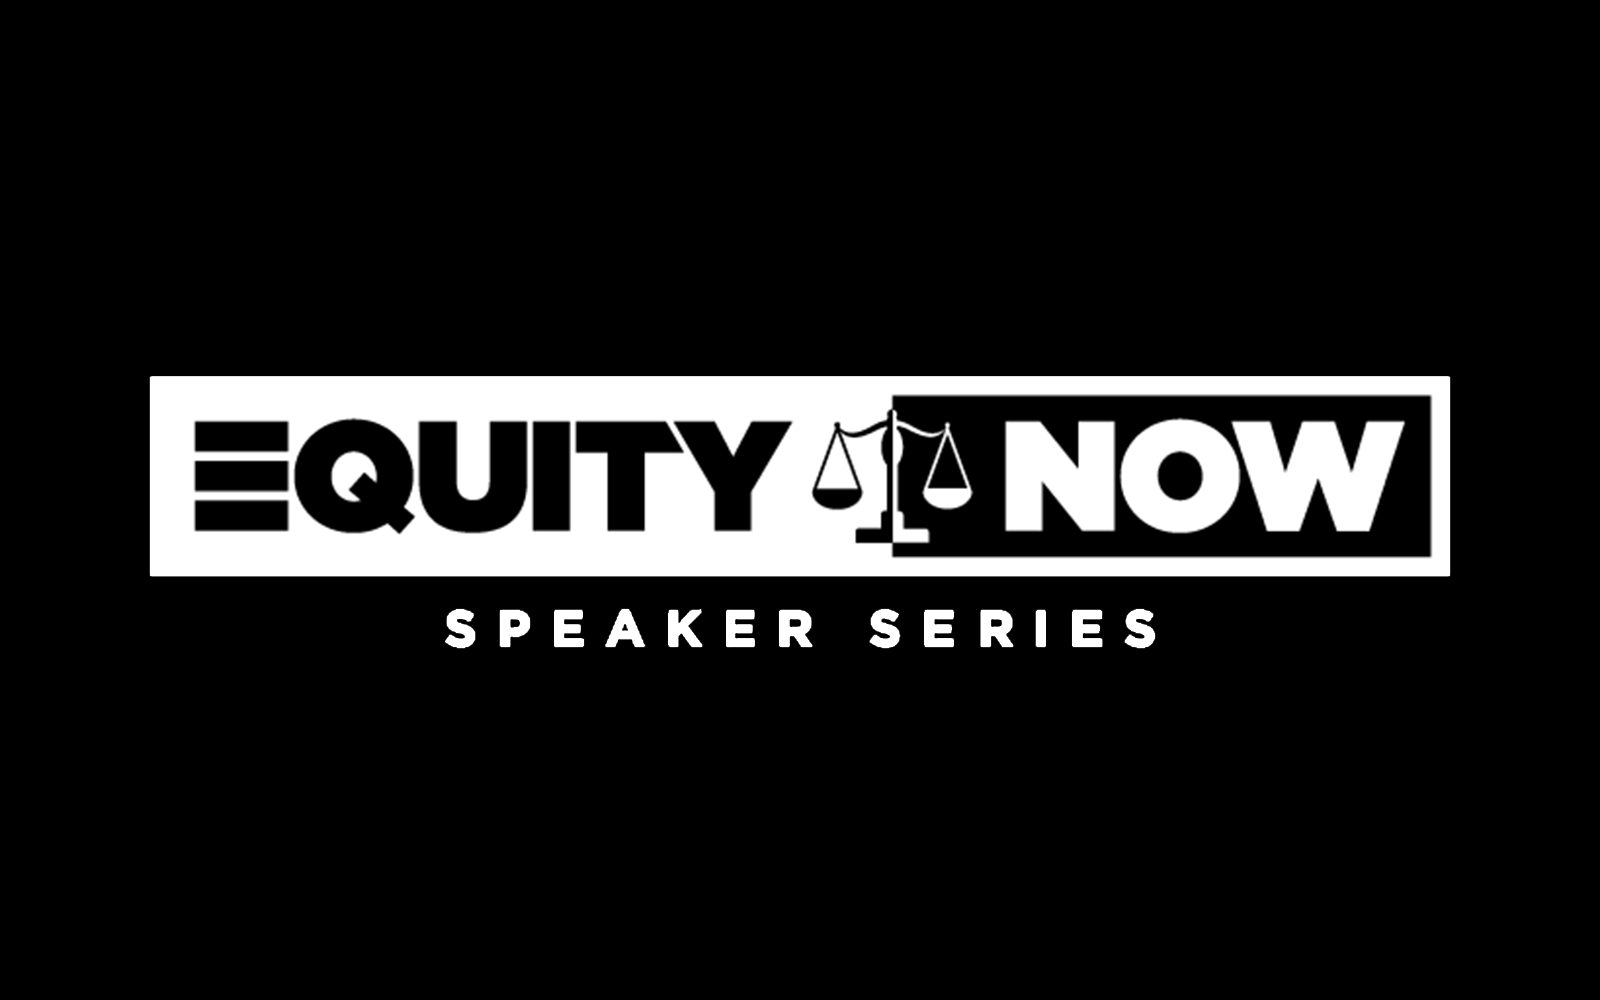 Image of Equity Now Speaker Series on black background